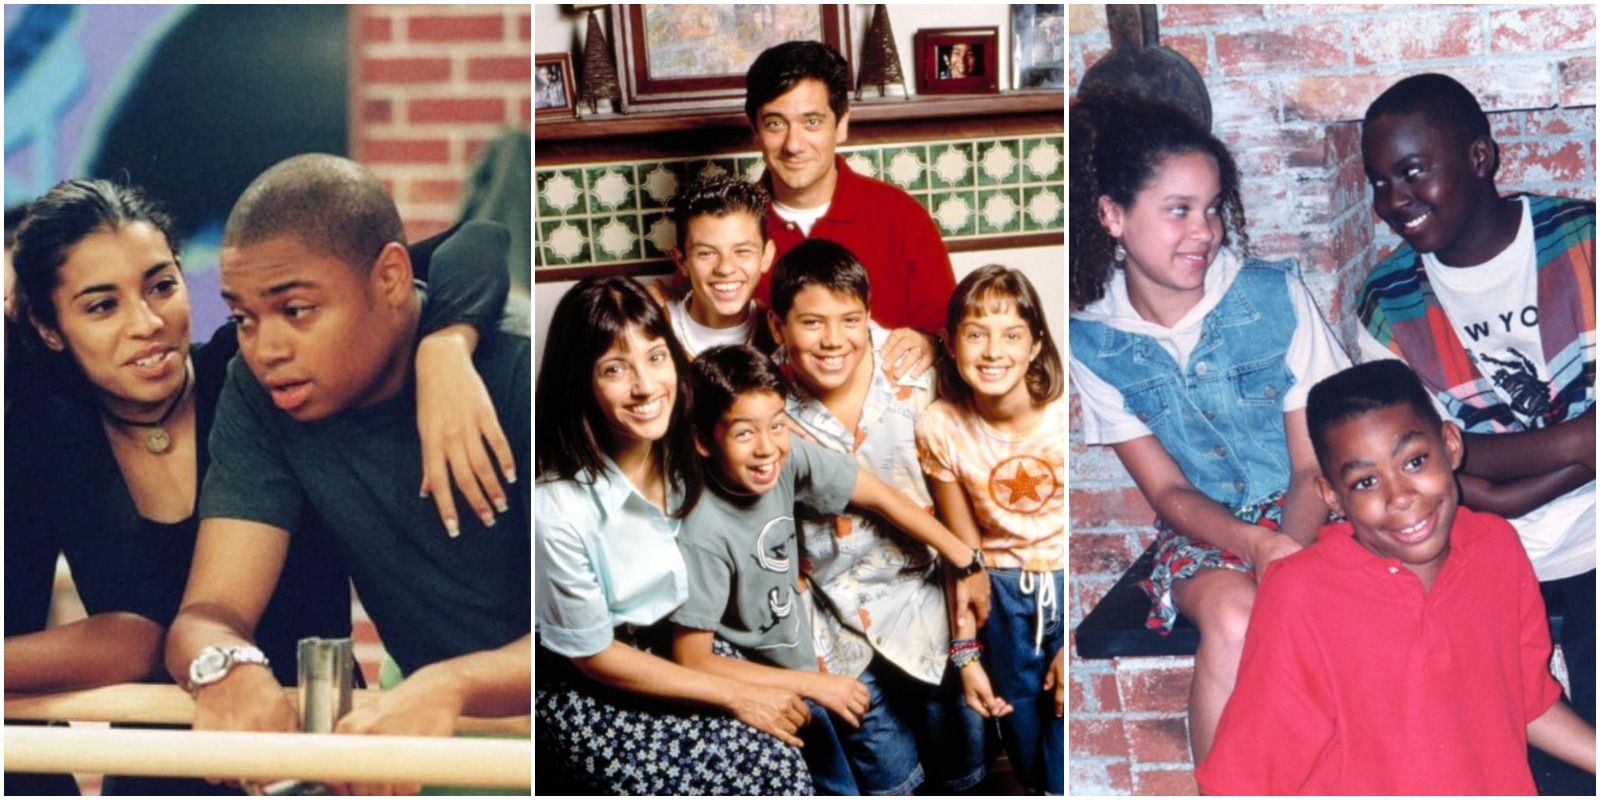 10 Underrated Nickelodeon Sitcoms That You Nearly Forgot About